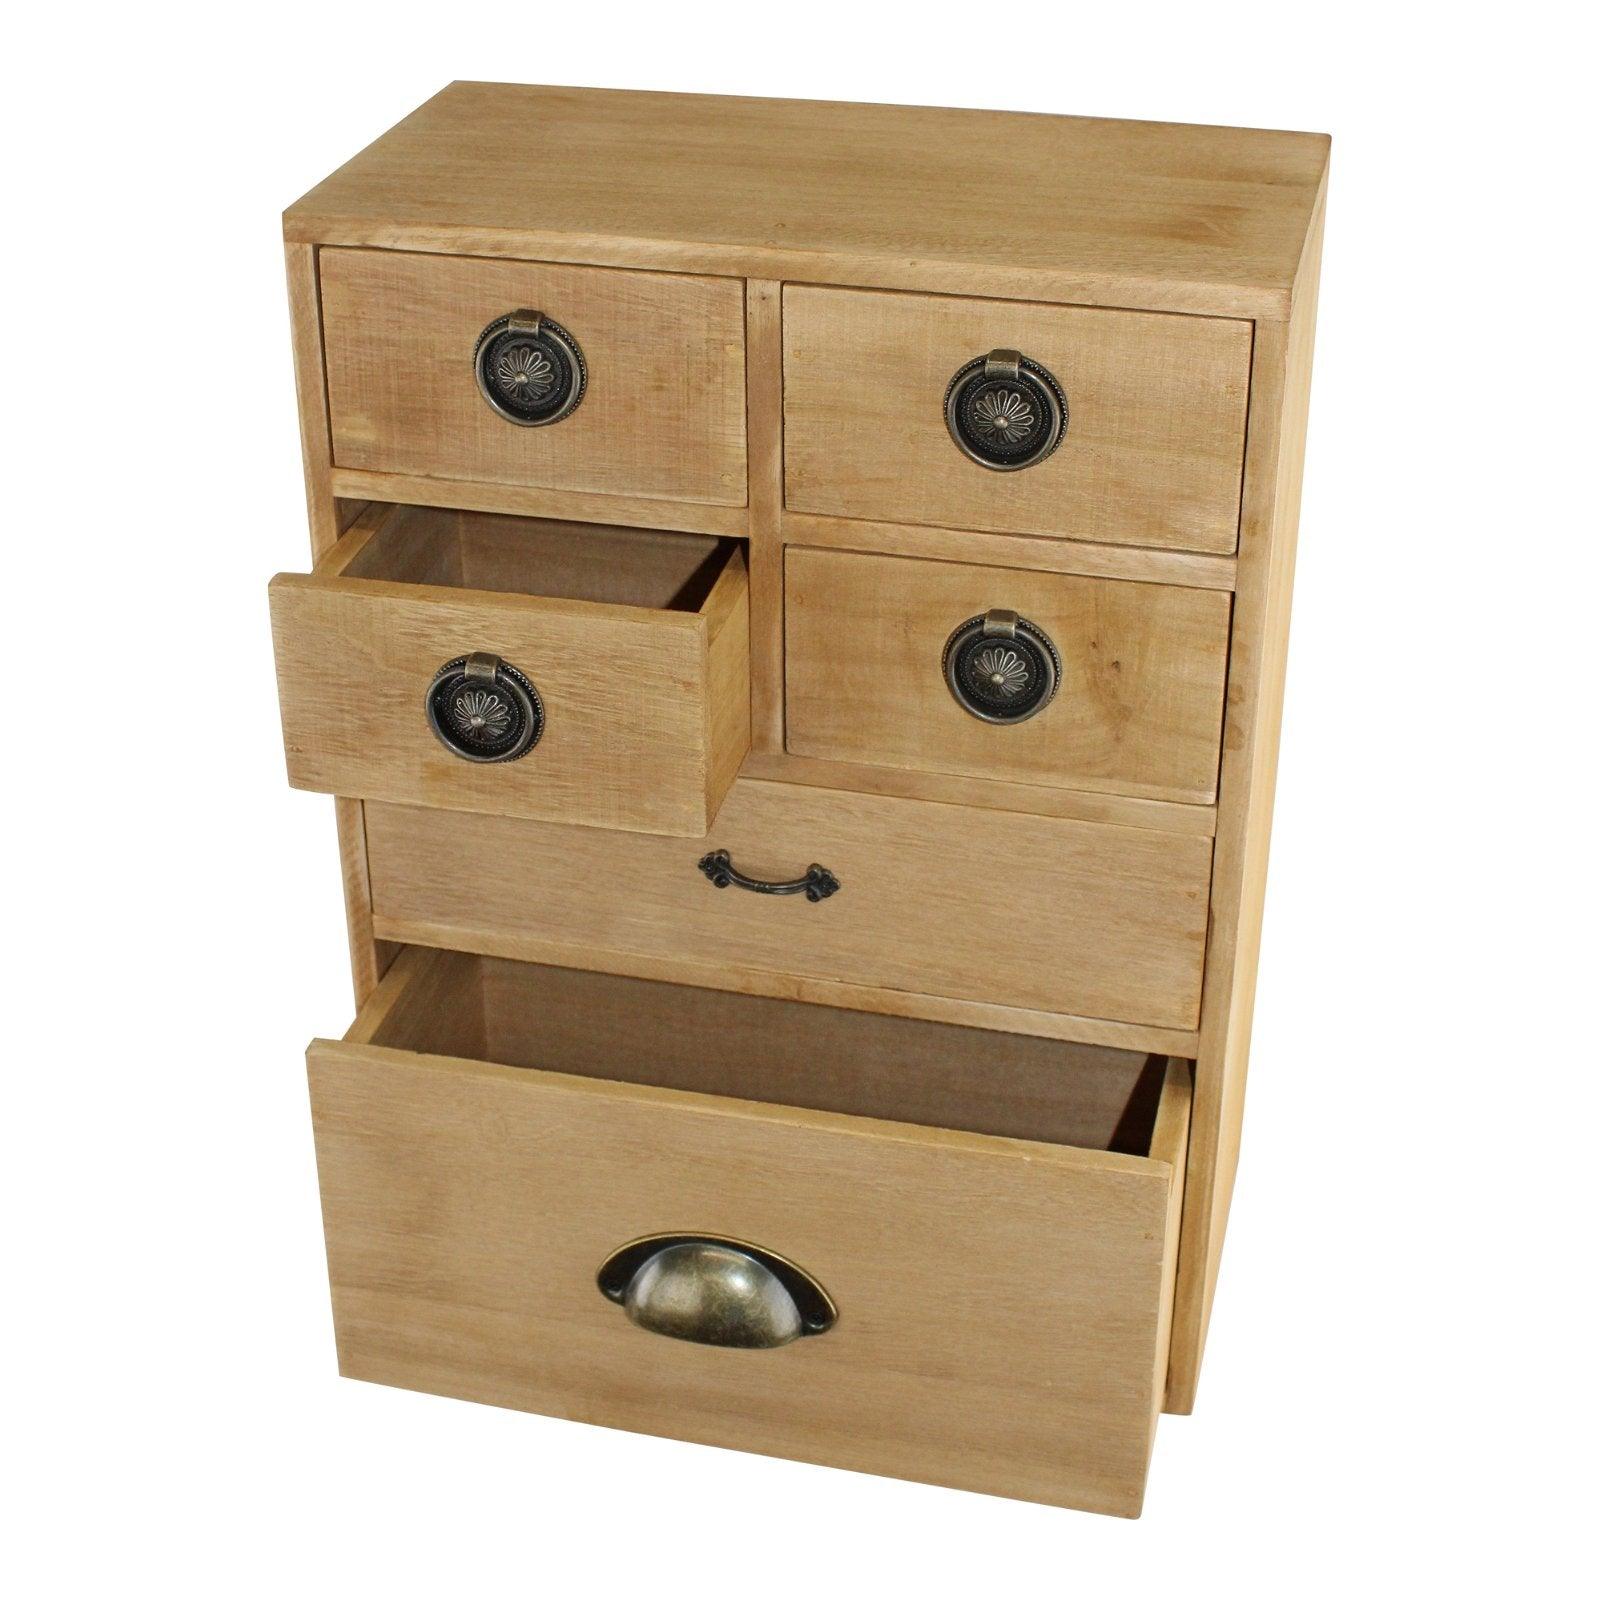 View 6 Drawer Storage Cabinet Assorted Size Drawers information